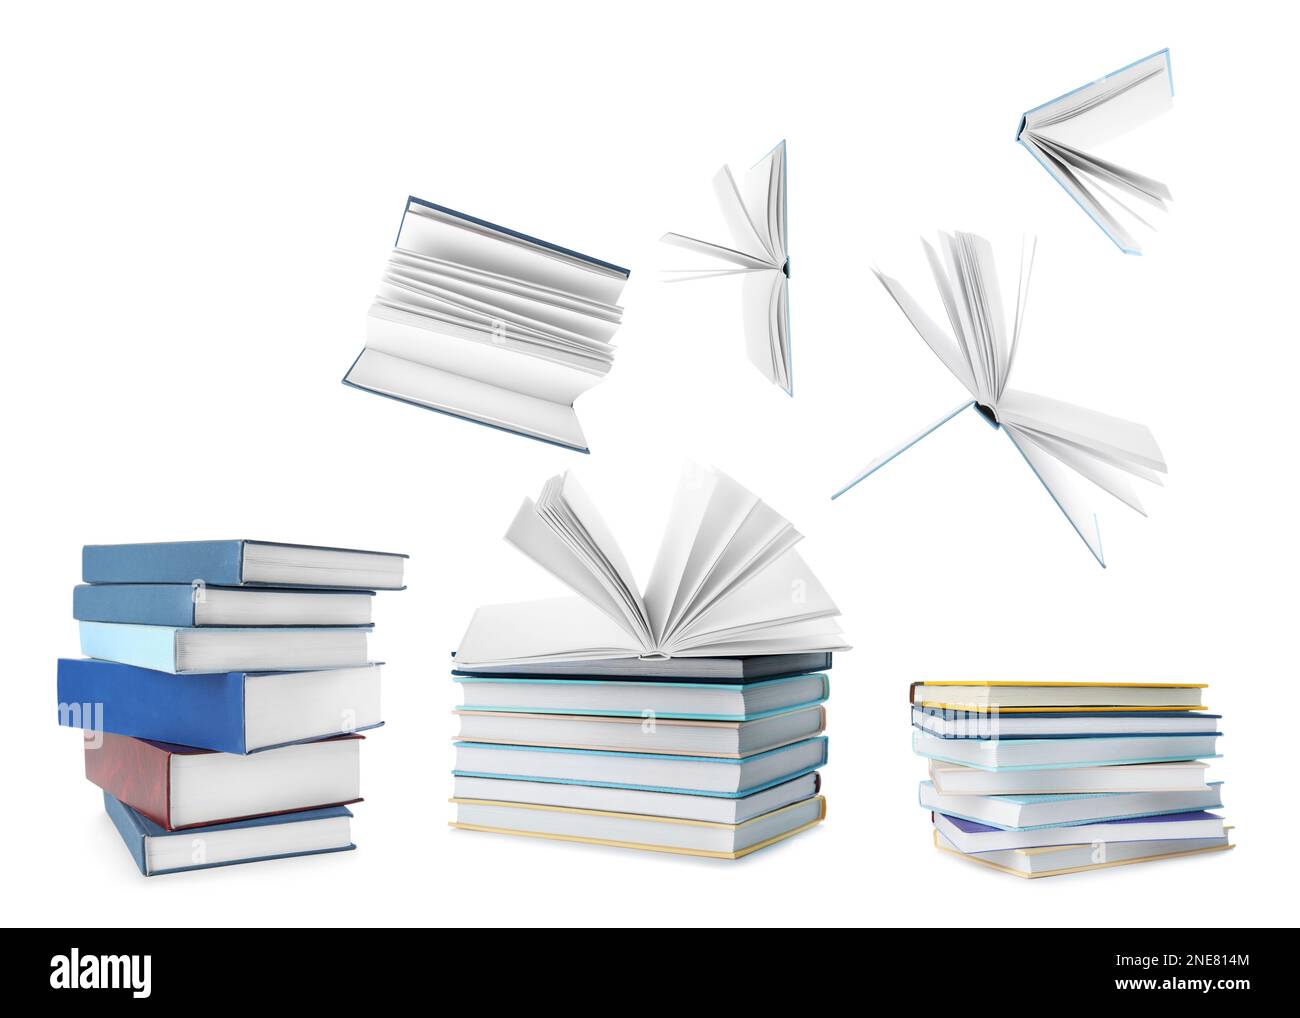 Stacked and flying books on white background, collage Stock Photo